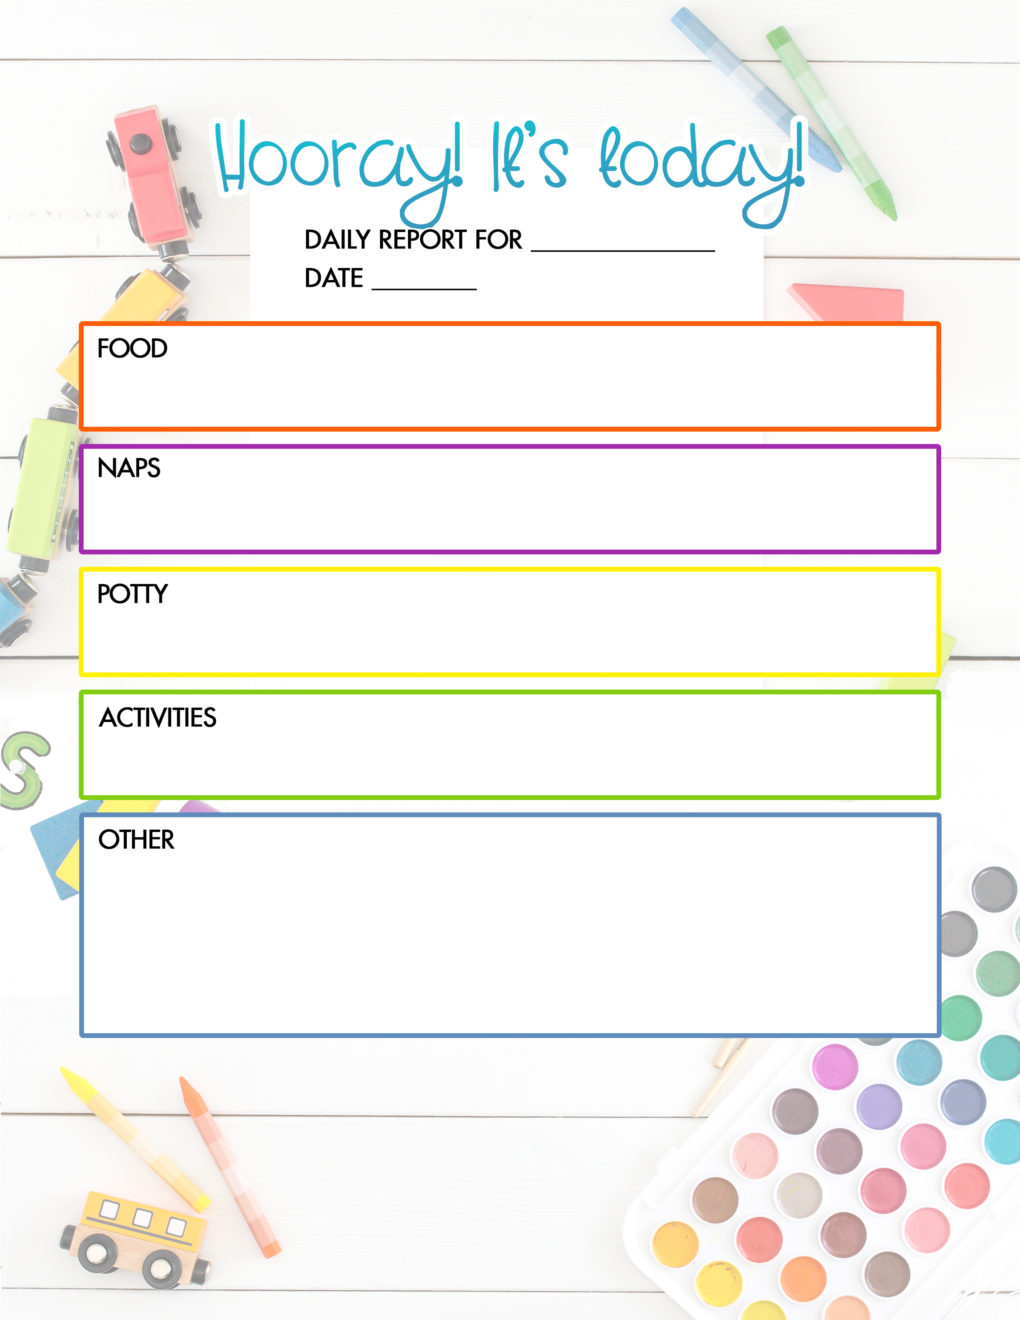 Free Daycare Daily Report  Child Care Printable - The DIY Lighthouse Pertaining To Daycare Infant Daily Report Template